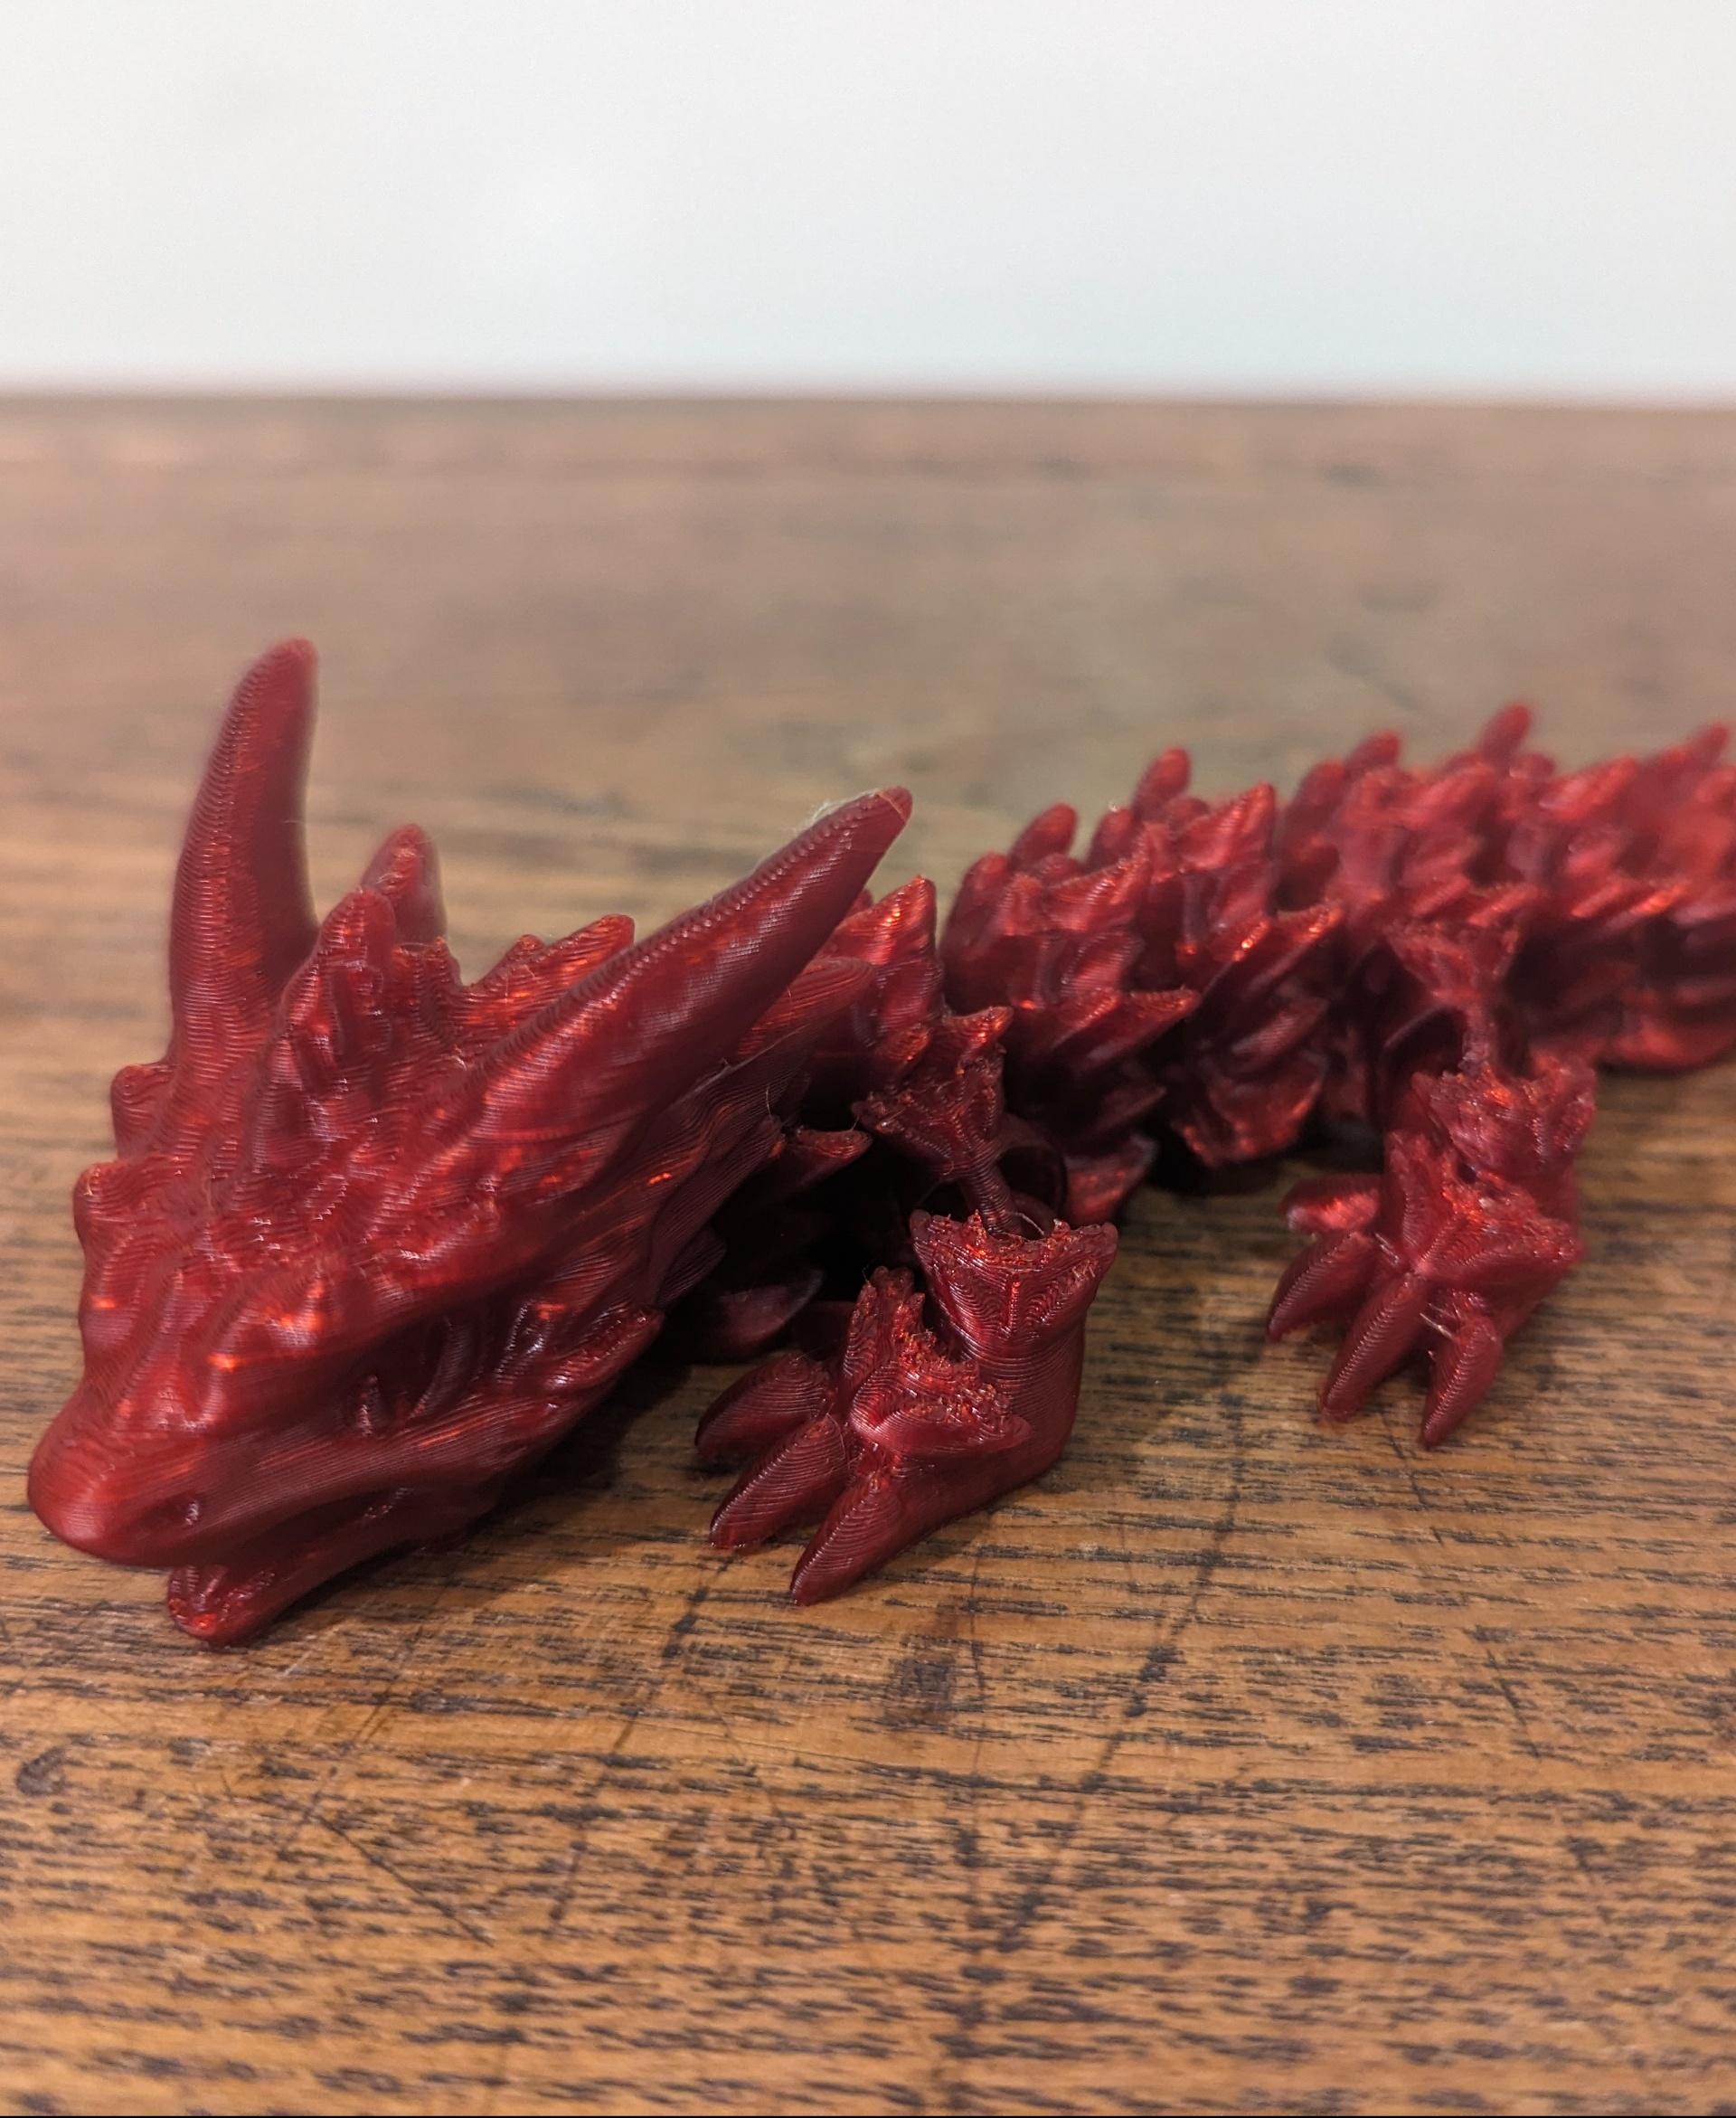 Frostbite, Winter Dragon Child - Articulated Snap-Flex Fidget (Medium Tightness Joints) - FrostBite printed on the KP3S in Coex3D Translucent Blood Red - 3d model